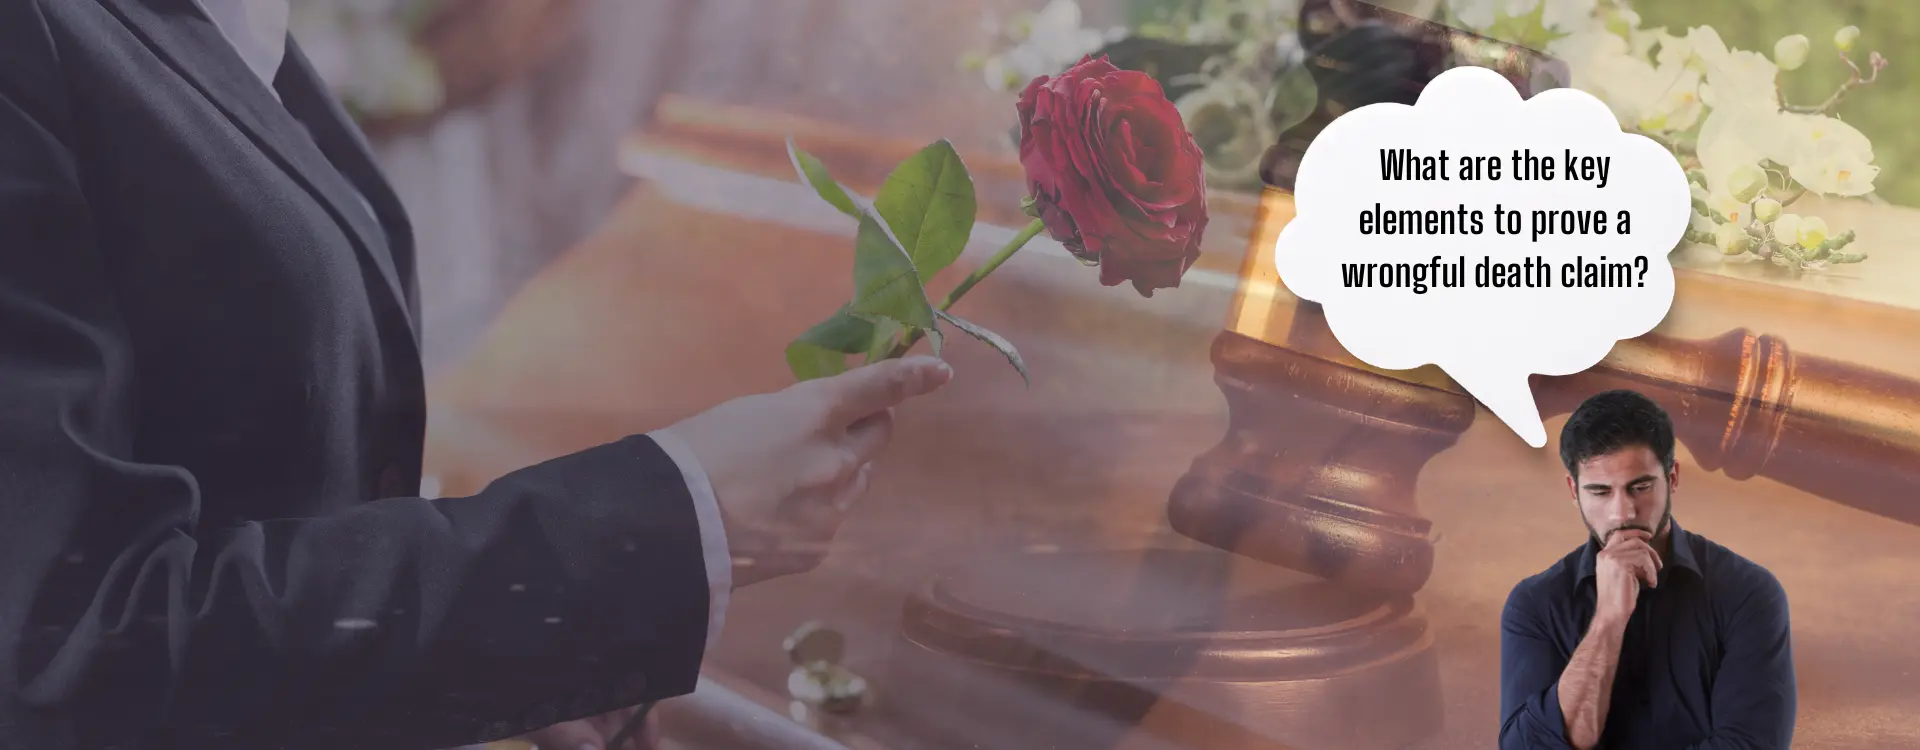 key elements to prove a wrongful death claim in california